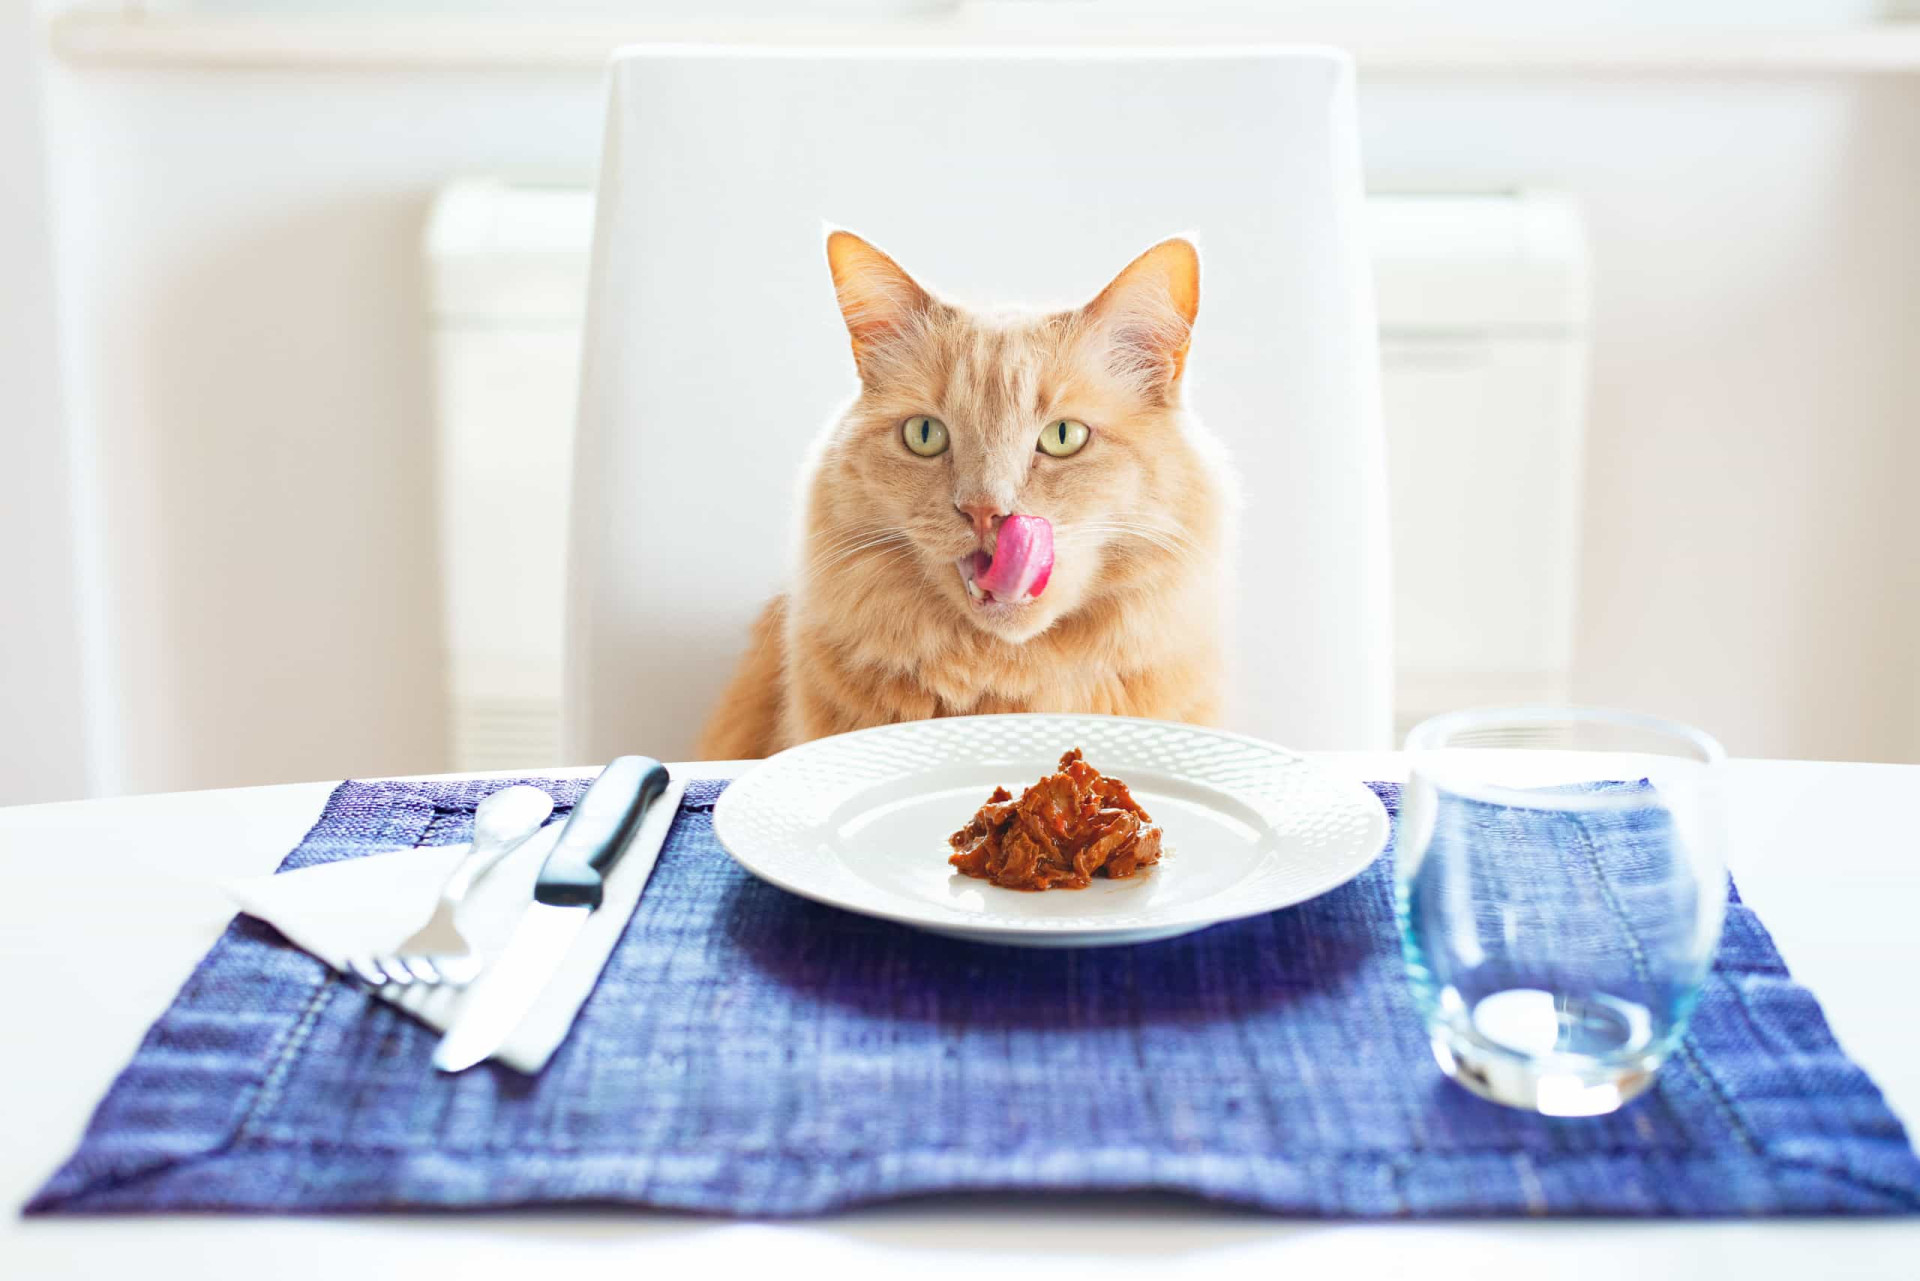 If you've always wanted to evaluate cat food, we're sorry that you didn't take part in this study.<p><a href="https://www.msn.com/en-au/community/channel/vid-7xx8mnucu55yw63we9va2gwr7uihbxwc68fxqp25x6tg4ftibpra?cvid=94631541bc0f4f89bfd59158d696ad7e">Follow us and access great exclusive content every day</a></p>